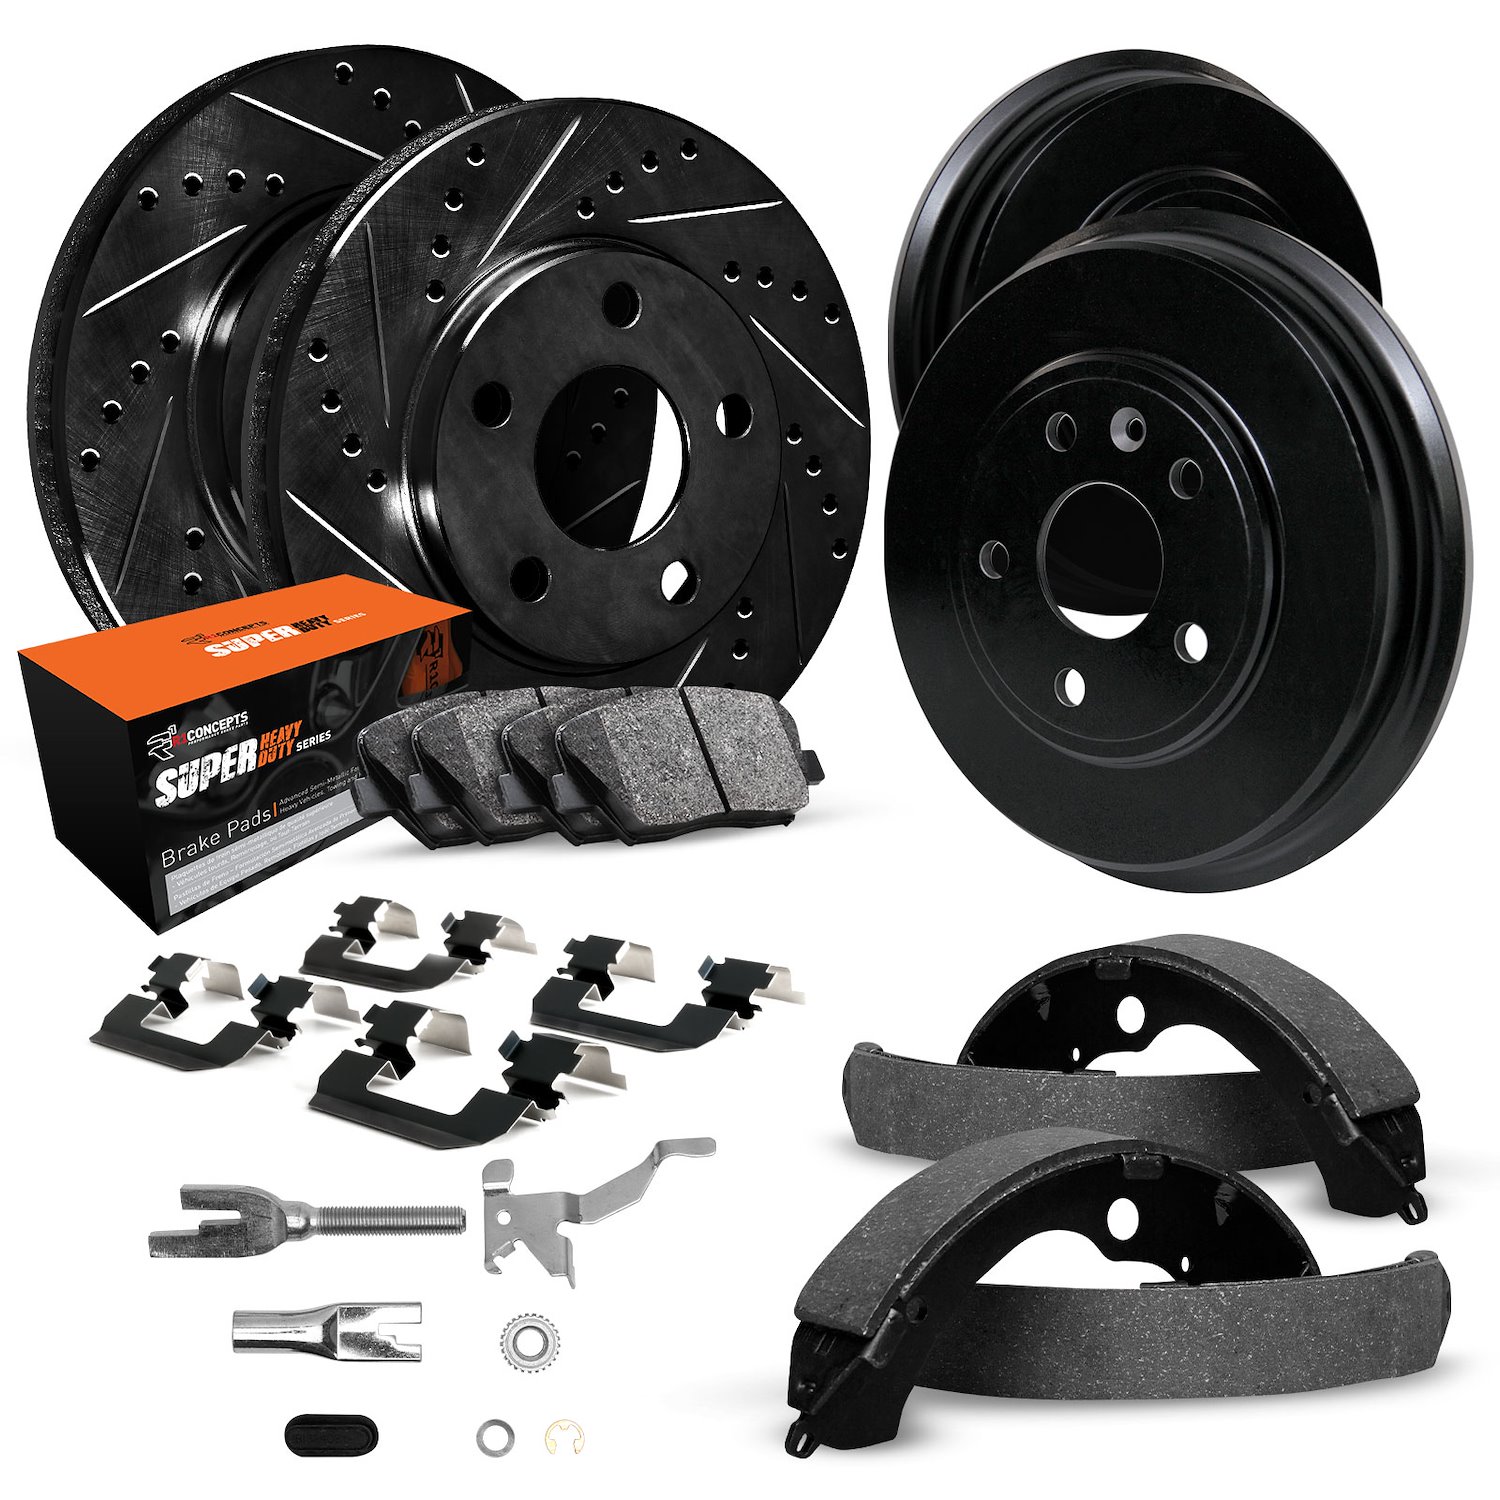 E-Line Slotted Black Brake Rotor & Drum Set w/Super-Duty Pads, Shoes, Hardware/Adjusters, 2003-2009 Ford/Lincoln/Mercury/Mazda